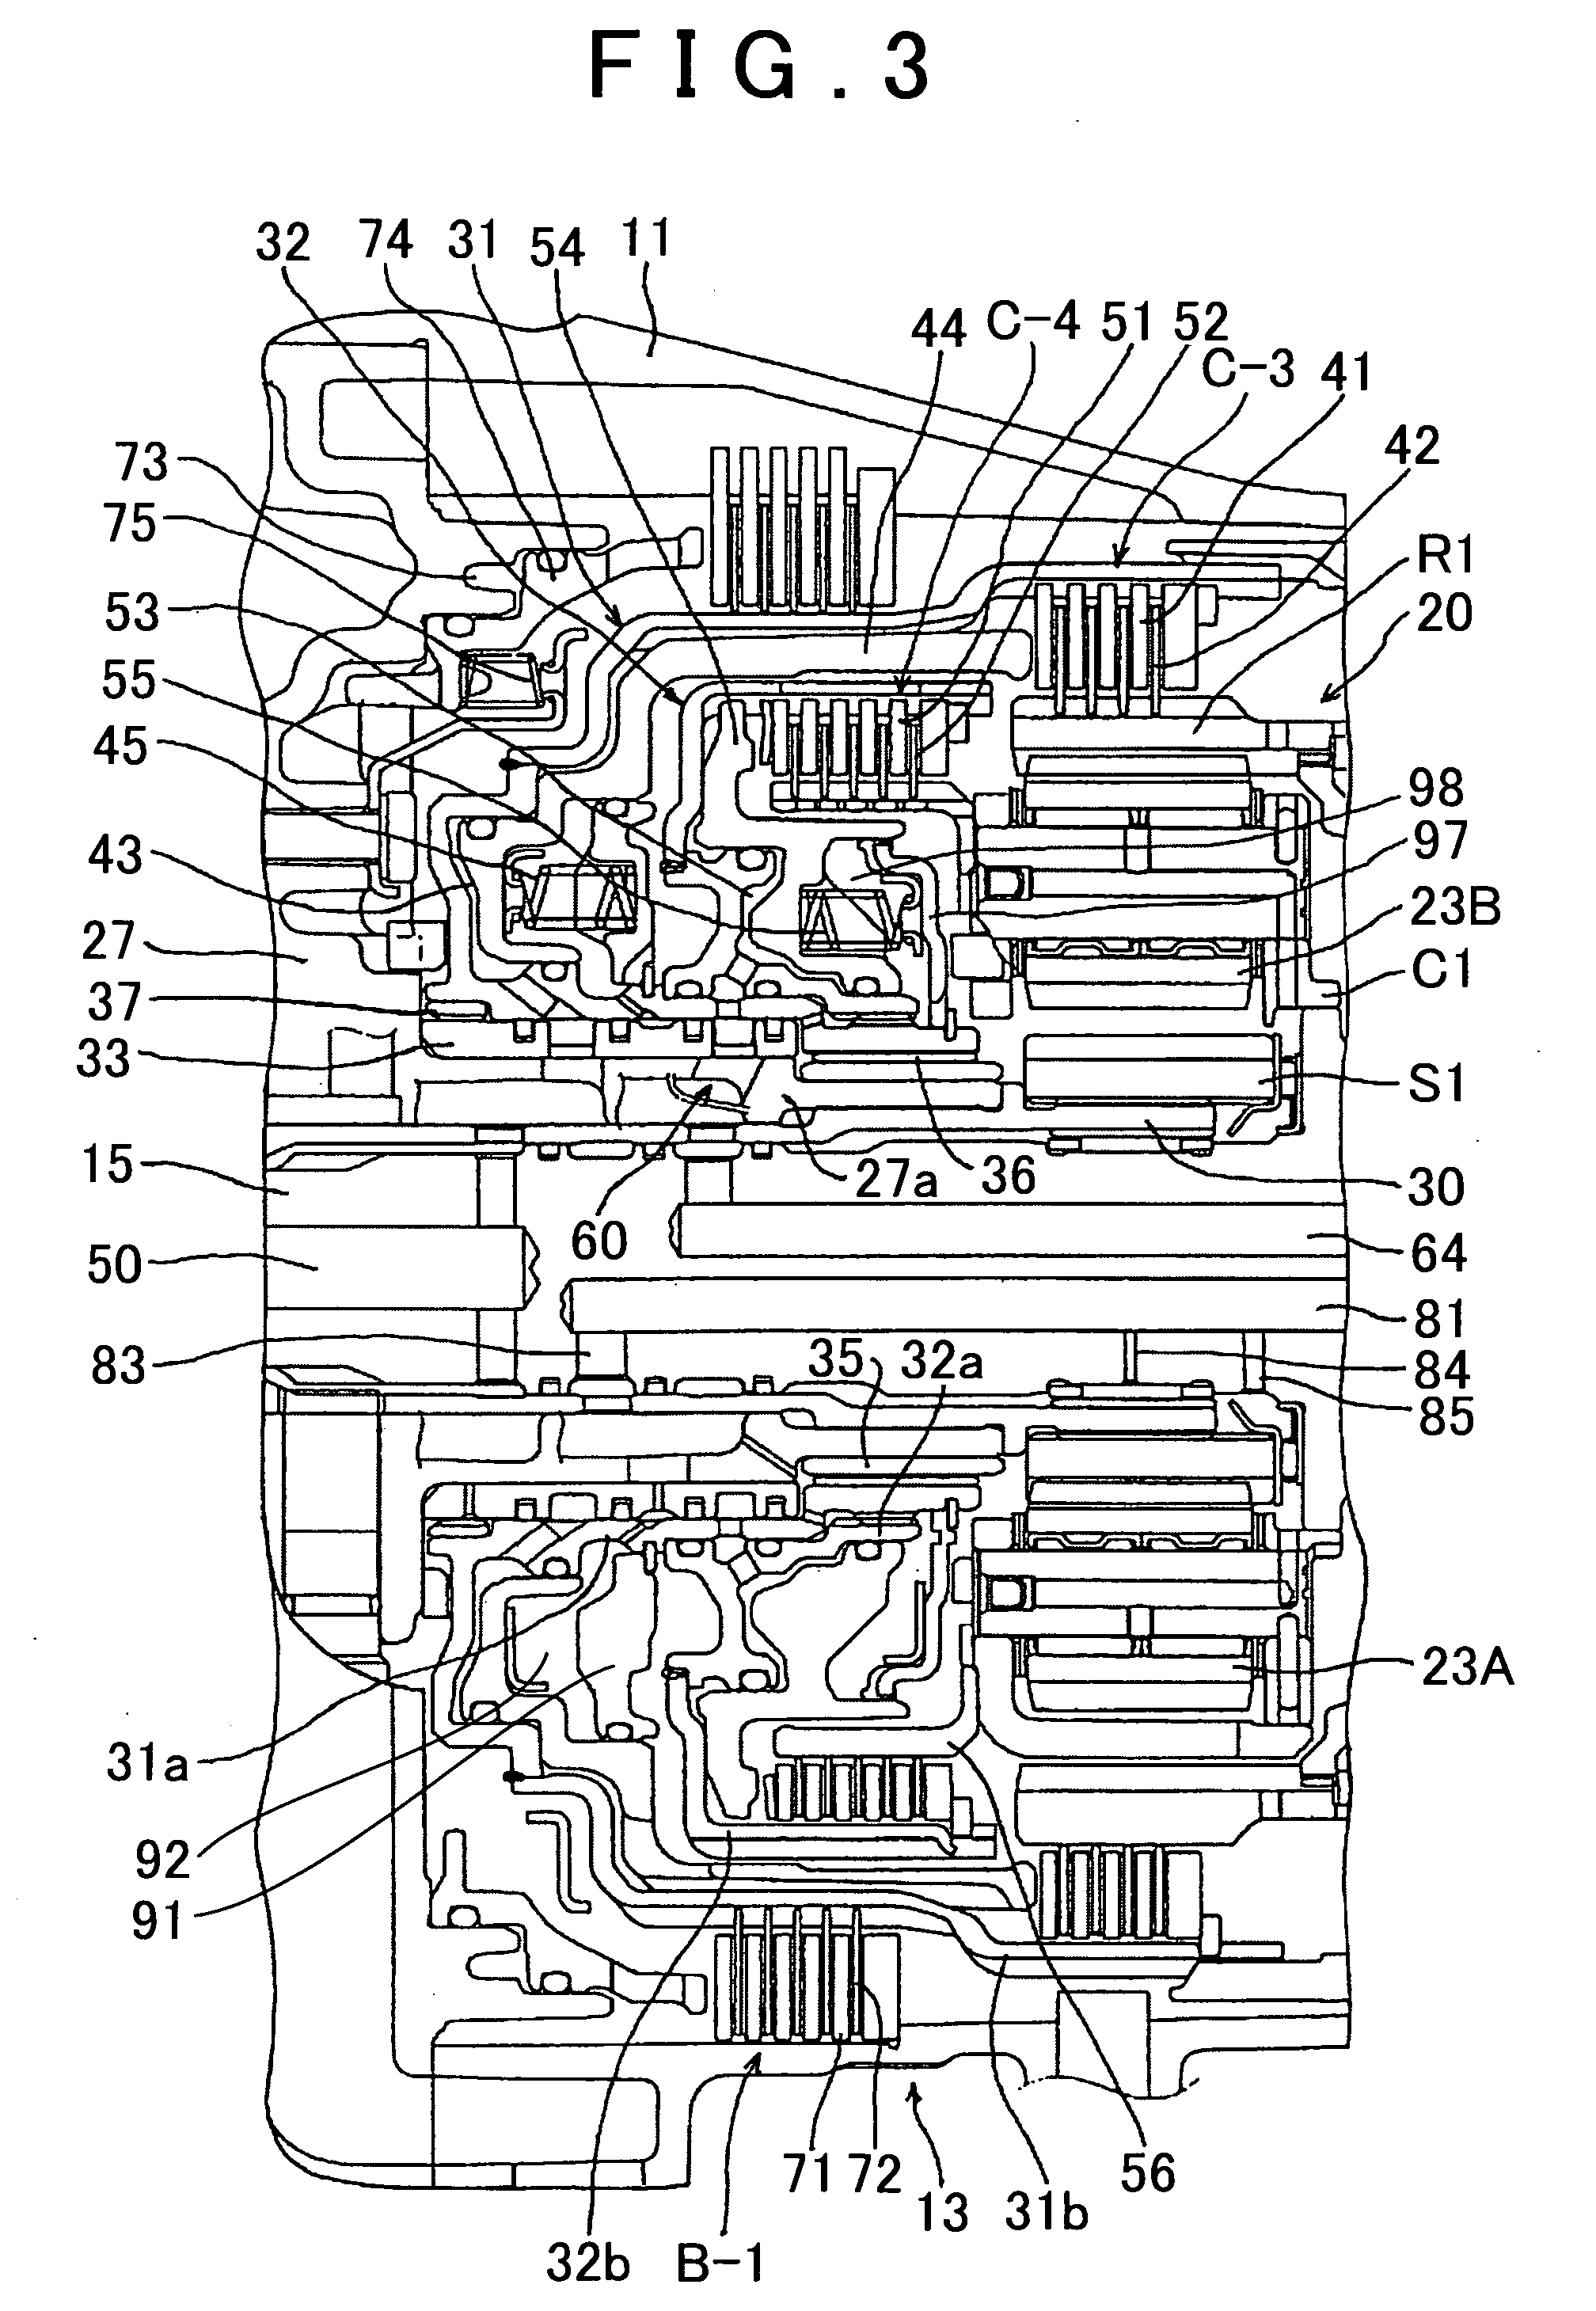 Oil pressure supply in an automatic transmission